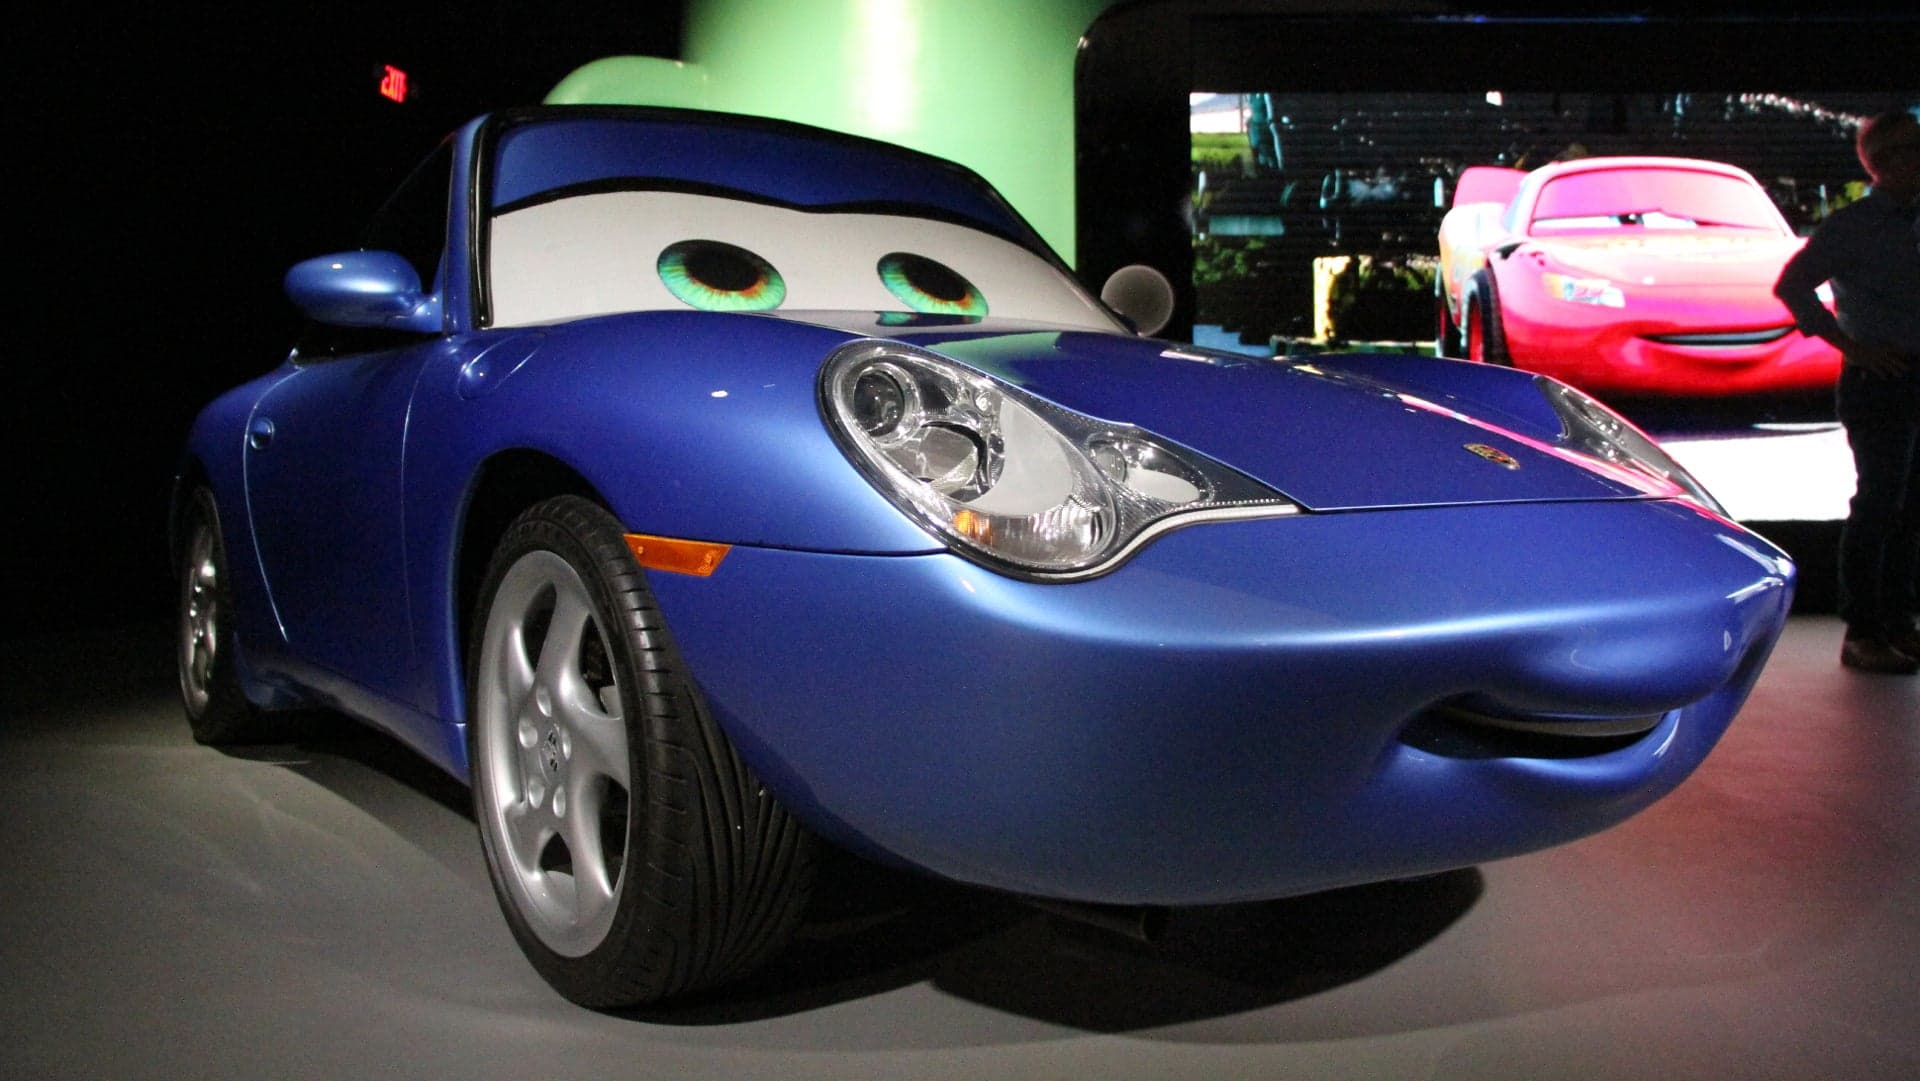 Here’s How Sally, the Porsche 911 Carrera in Pixar’s Cars, Was Made